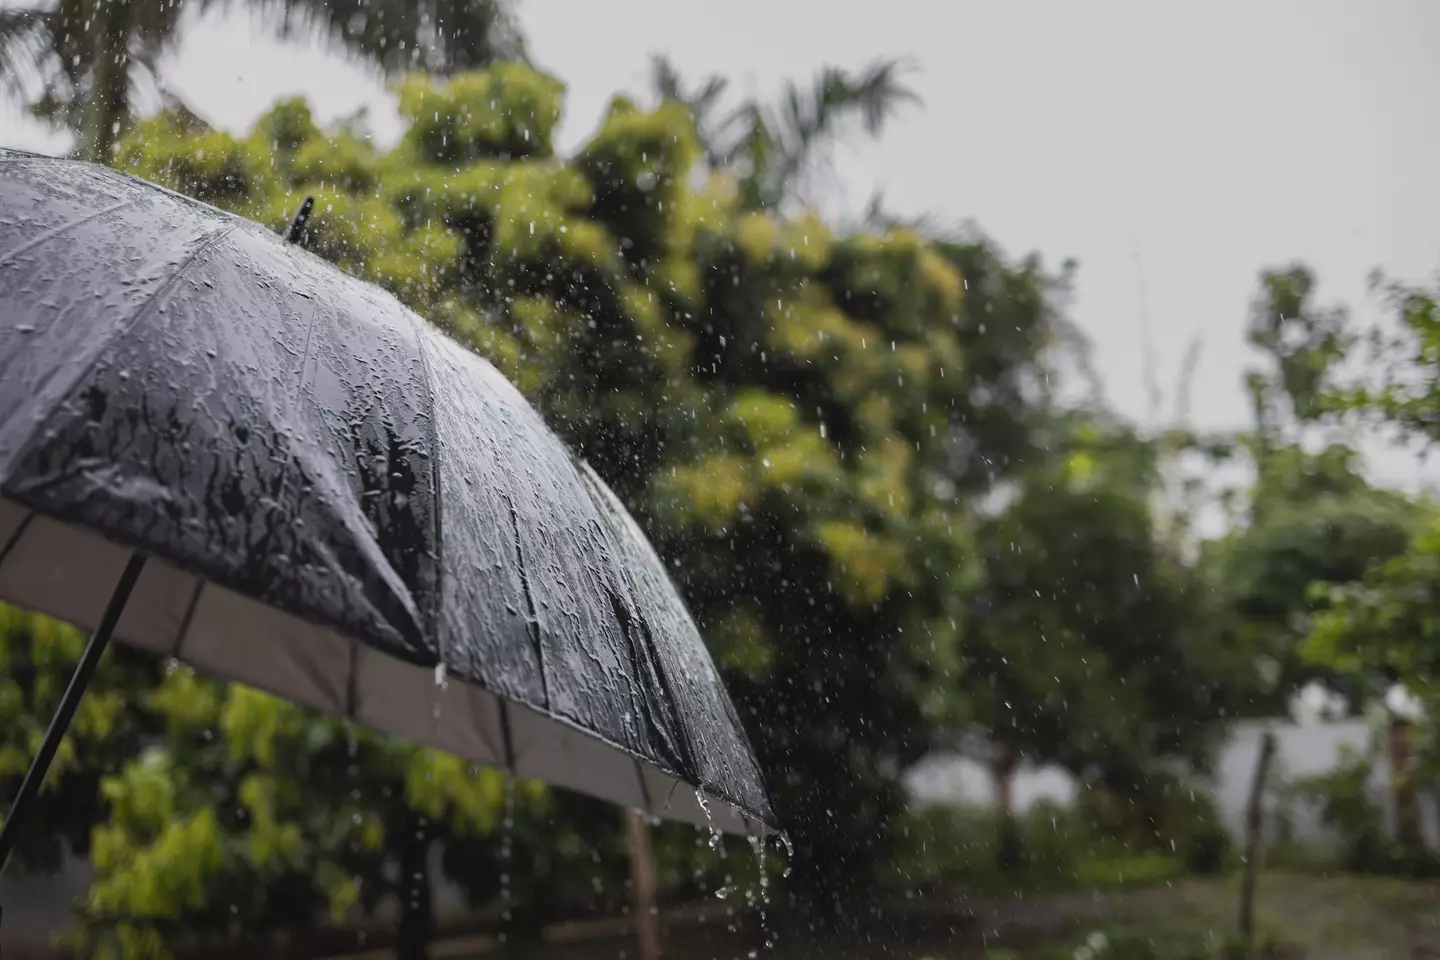 There's a reason we're attracted to the smell of rain.